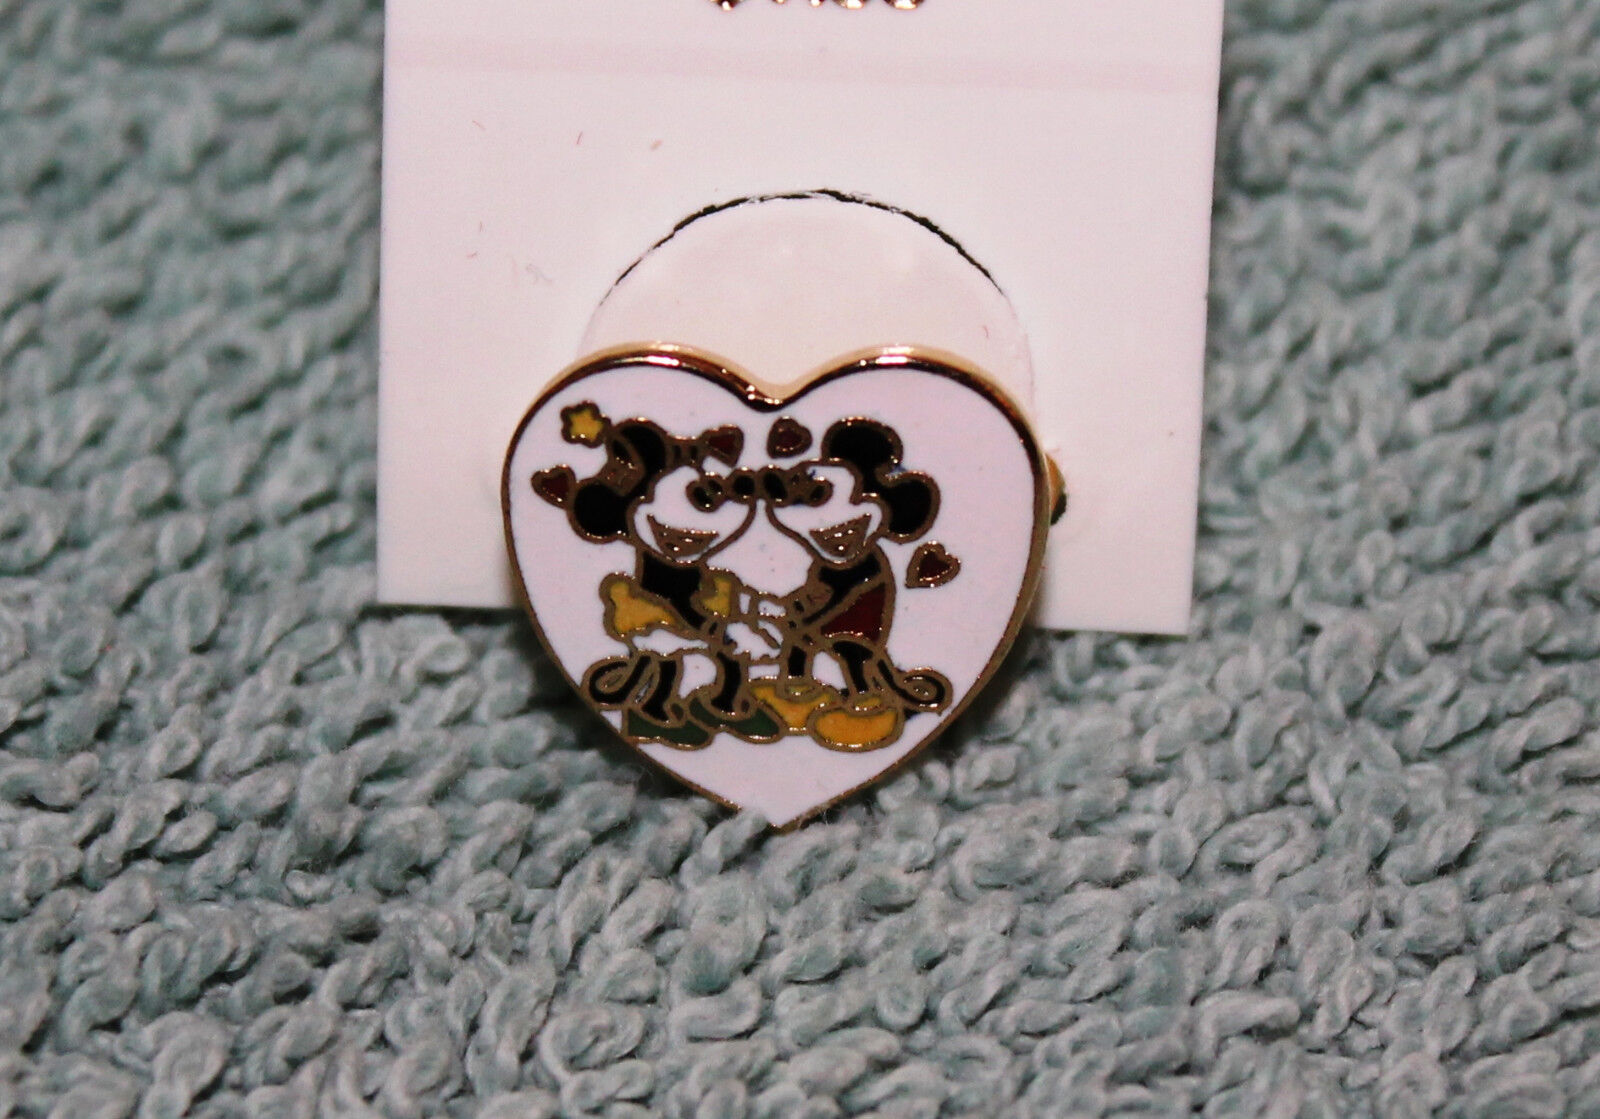 NICE VINTAGE DISNEY MICKEY MOUSE MINNIE MOUSE HEART SHAPED RING NOS ADJUSTABLE